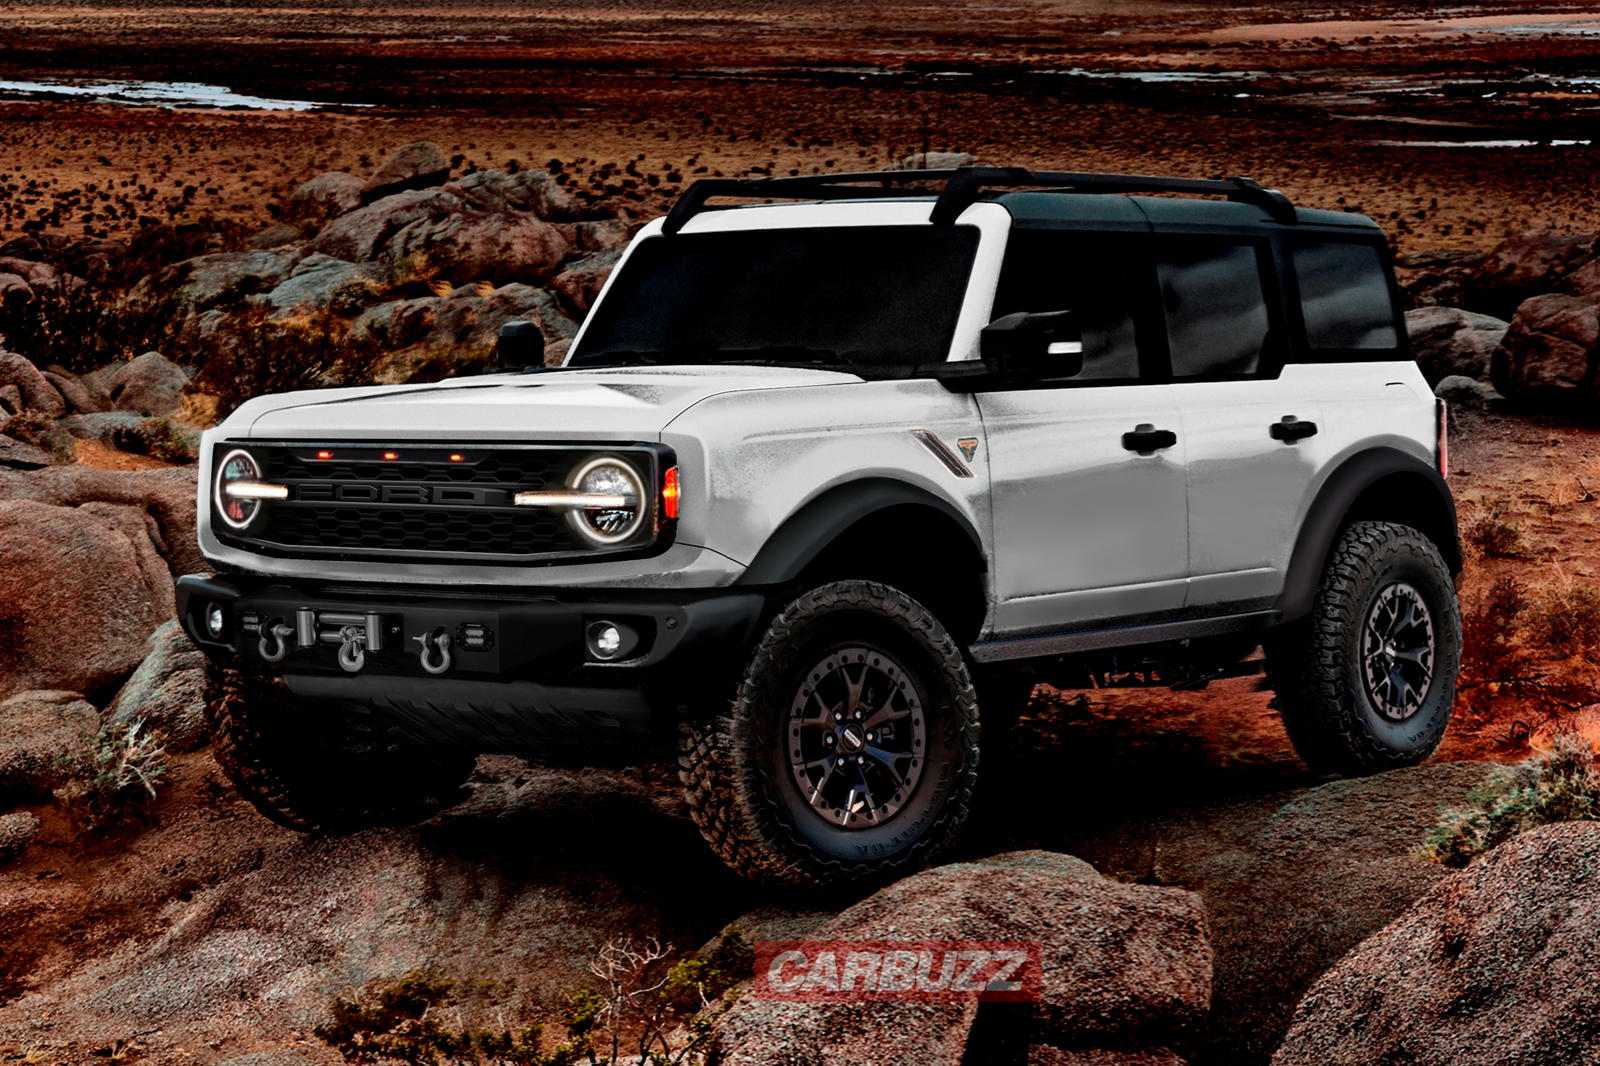 Best Look Yet At The Ford Bronco Warthog | CarBuzz